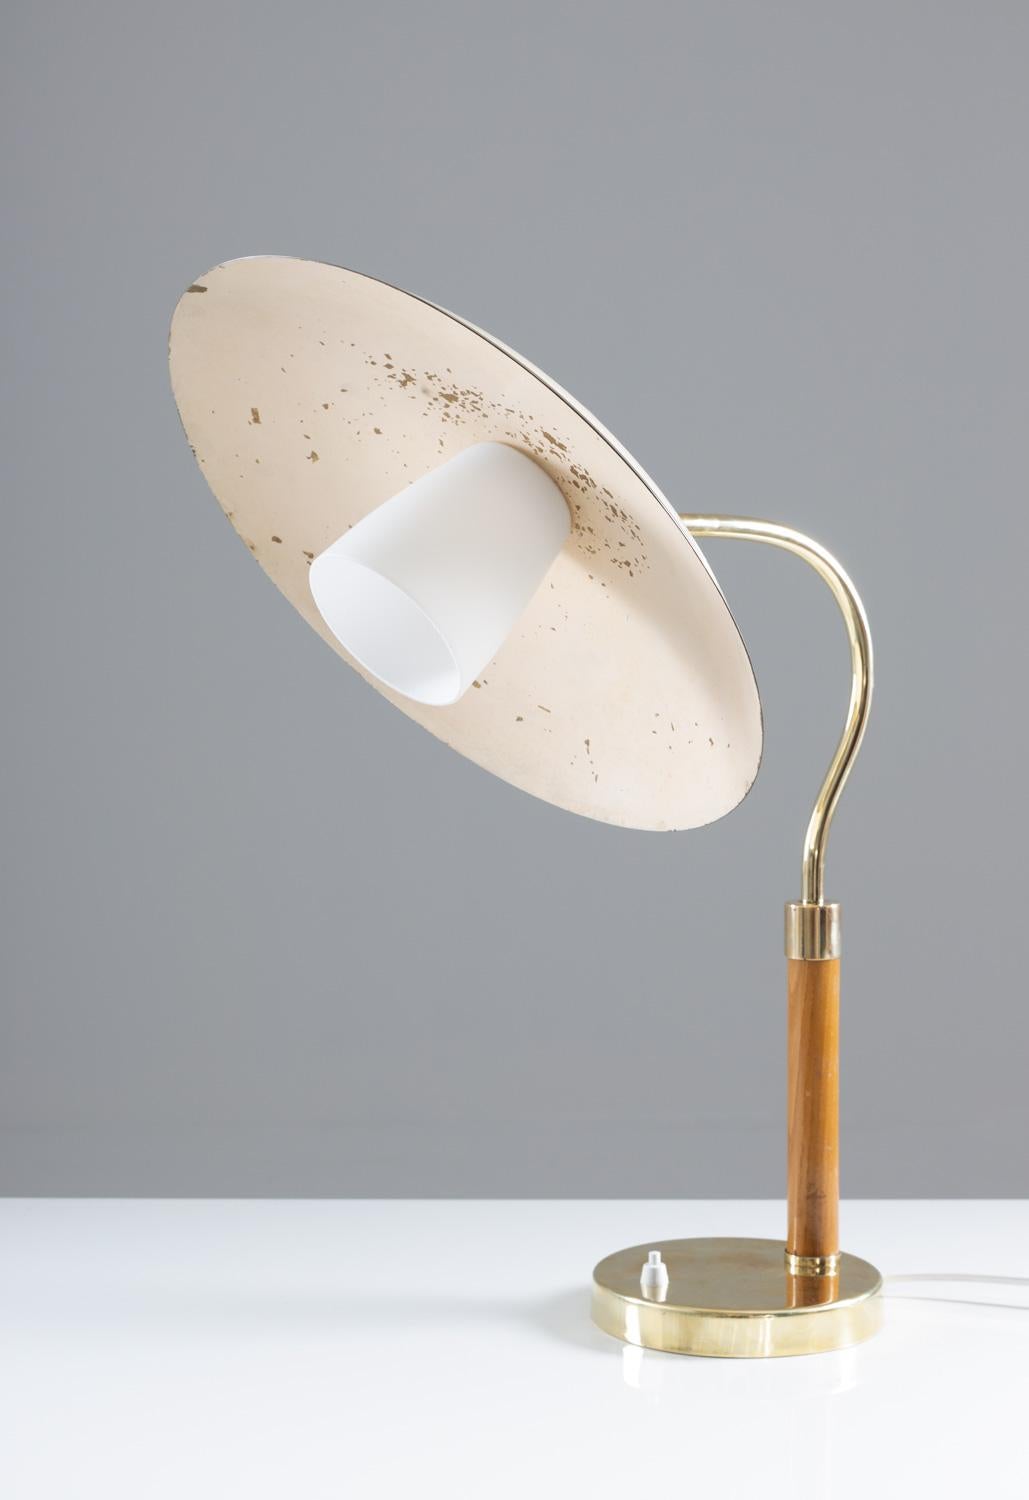 20th Century Swedish Midcentury Table Lamp Model 600 by Boréns in Brass, Glass and Wood For Sale